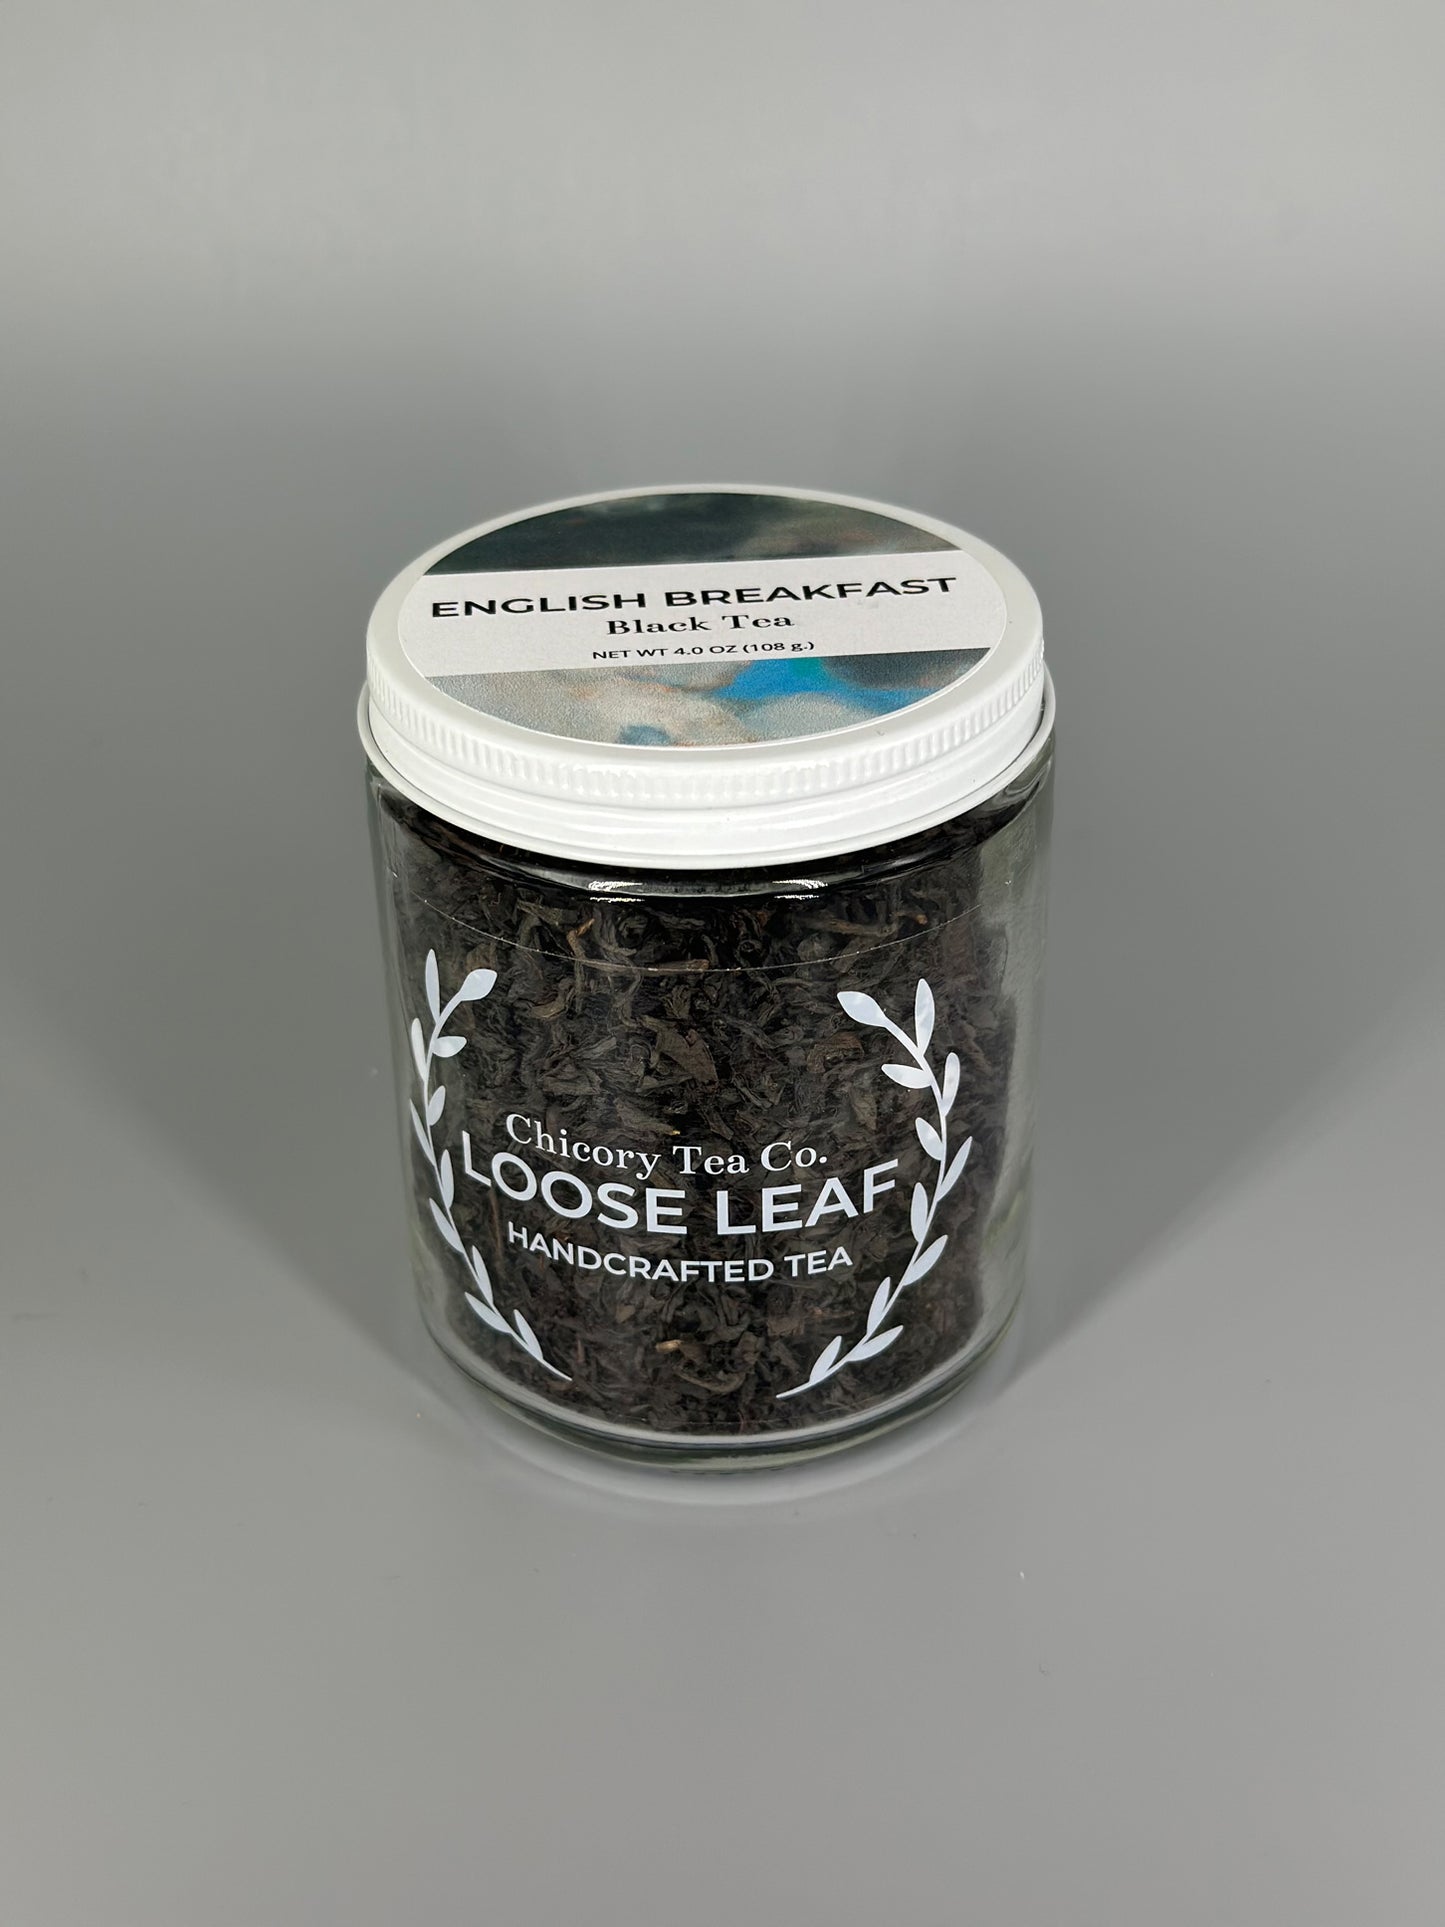 Chicory Tea Co.'s English Breakfast Black Tea in the jar, view from the front